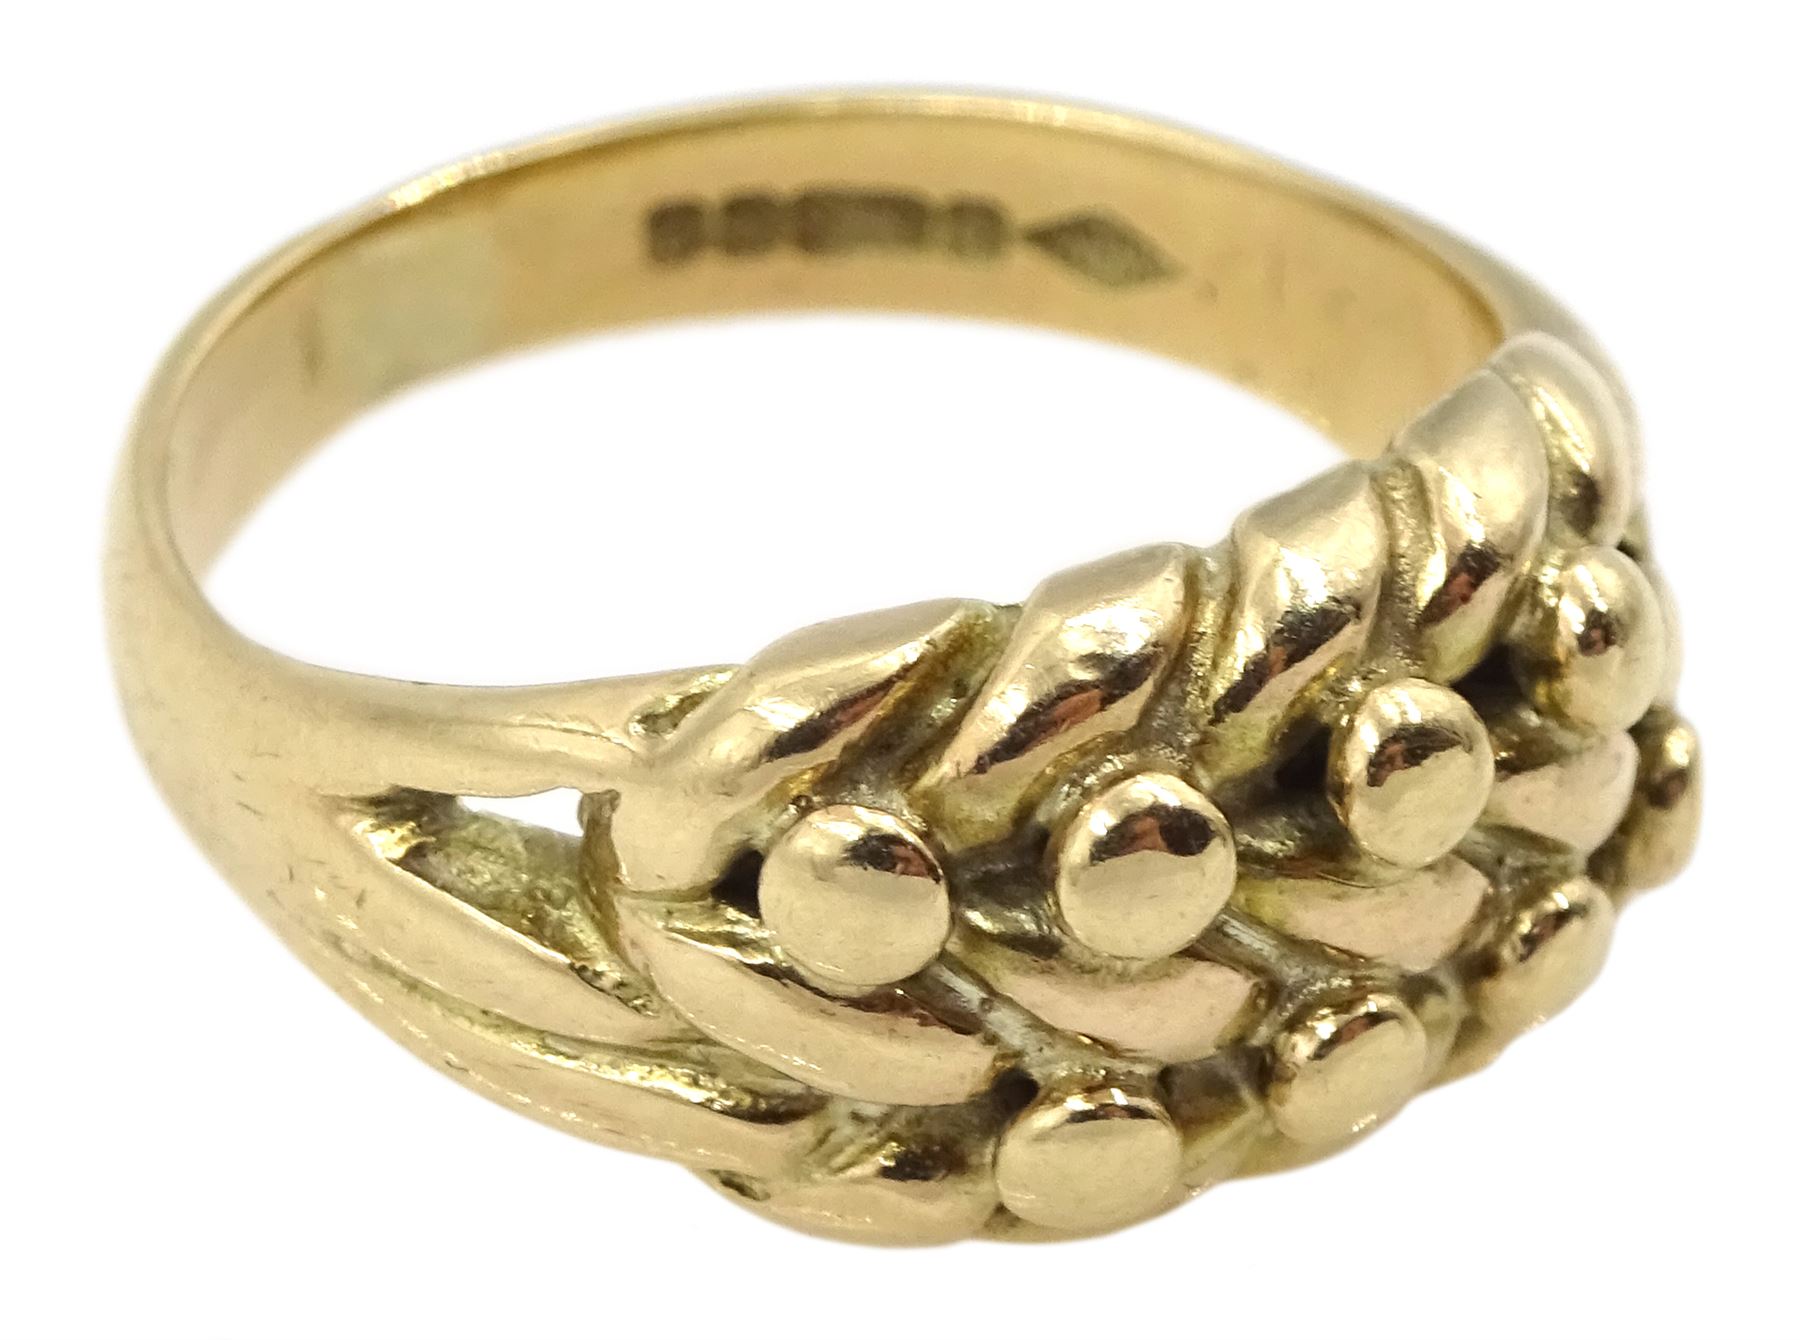 9ct gold keeper ring - Image 3 of 4